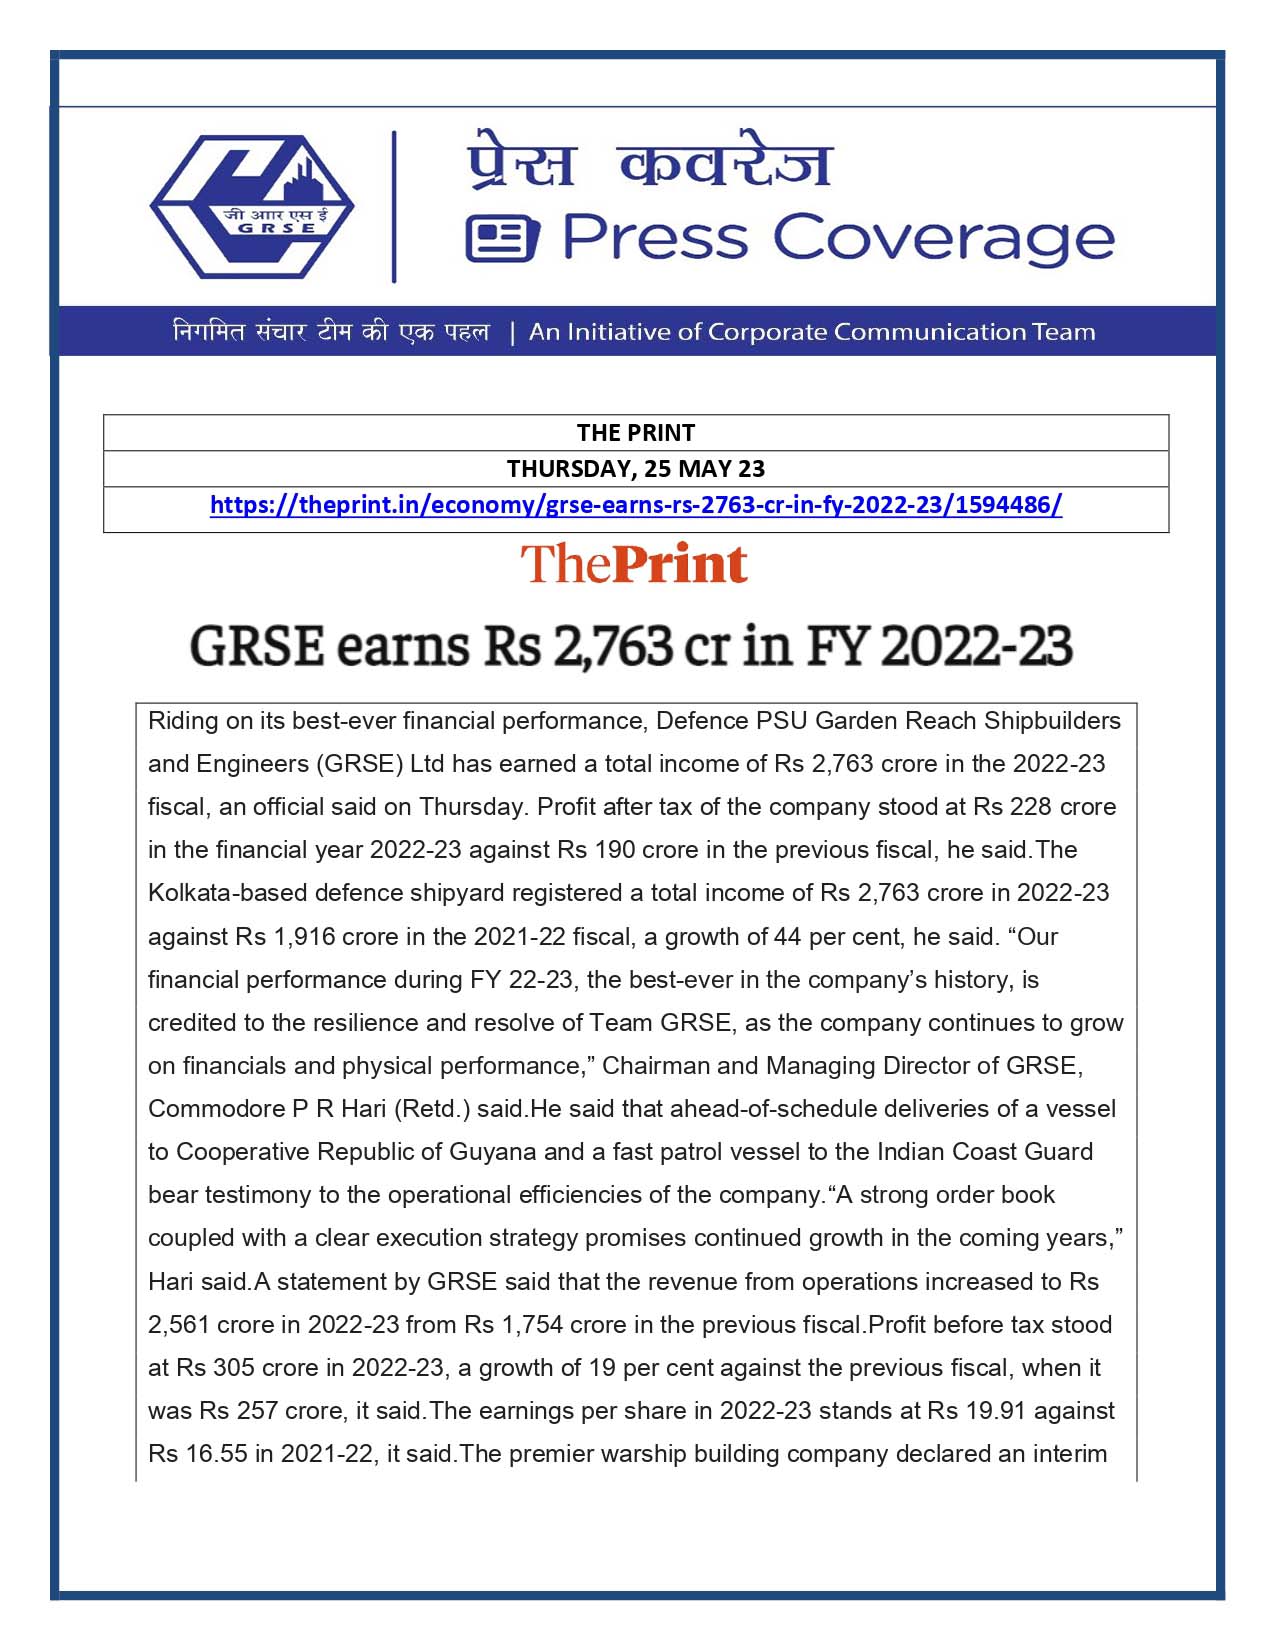 GRSE earns Rs 2763 cr in Fy 2022-23